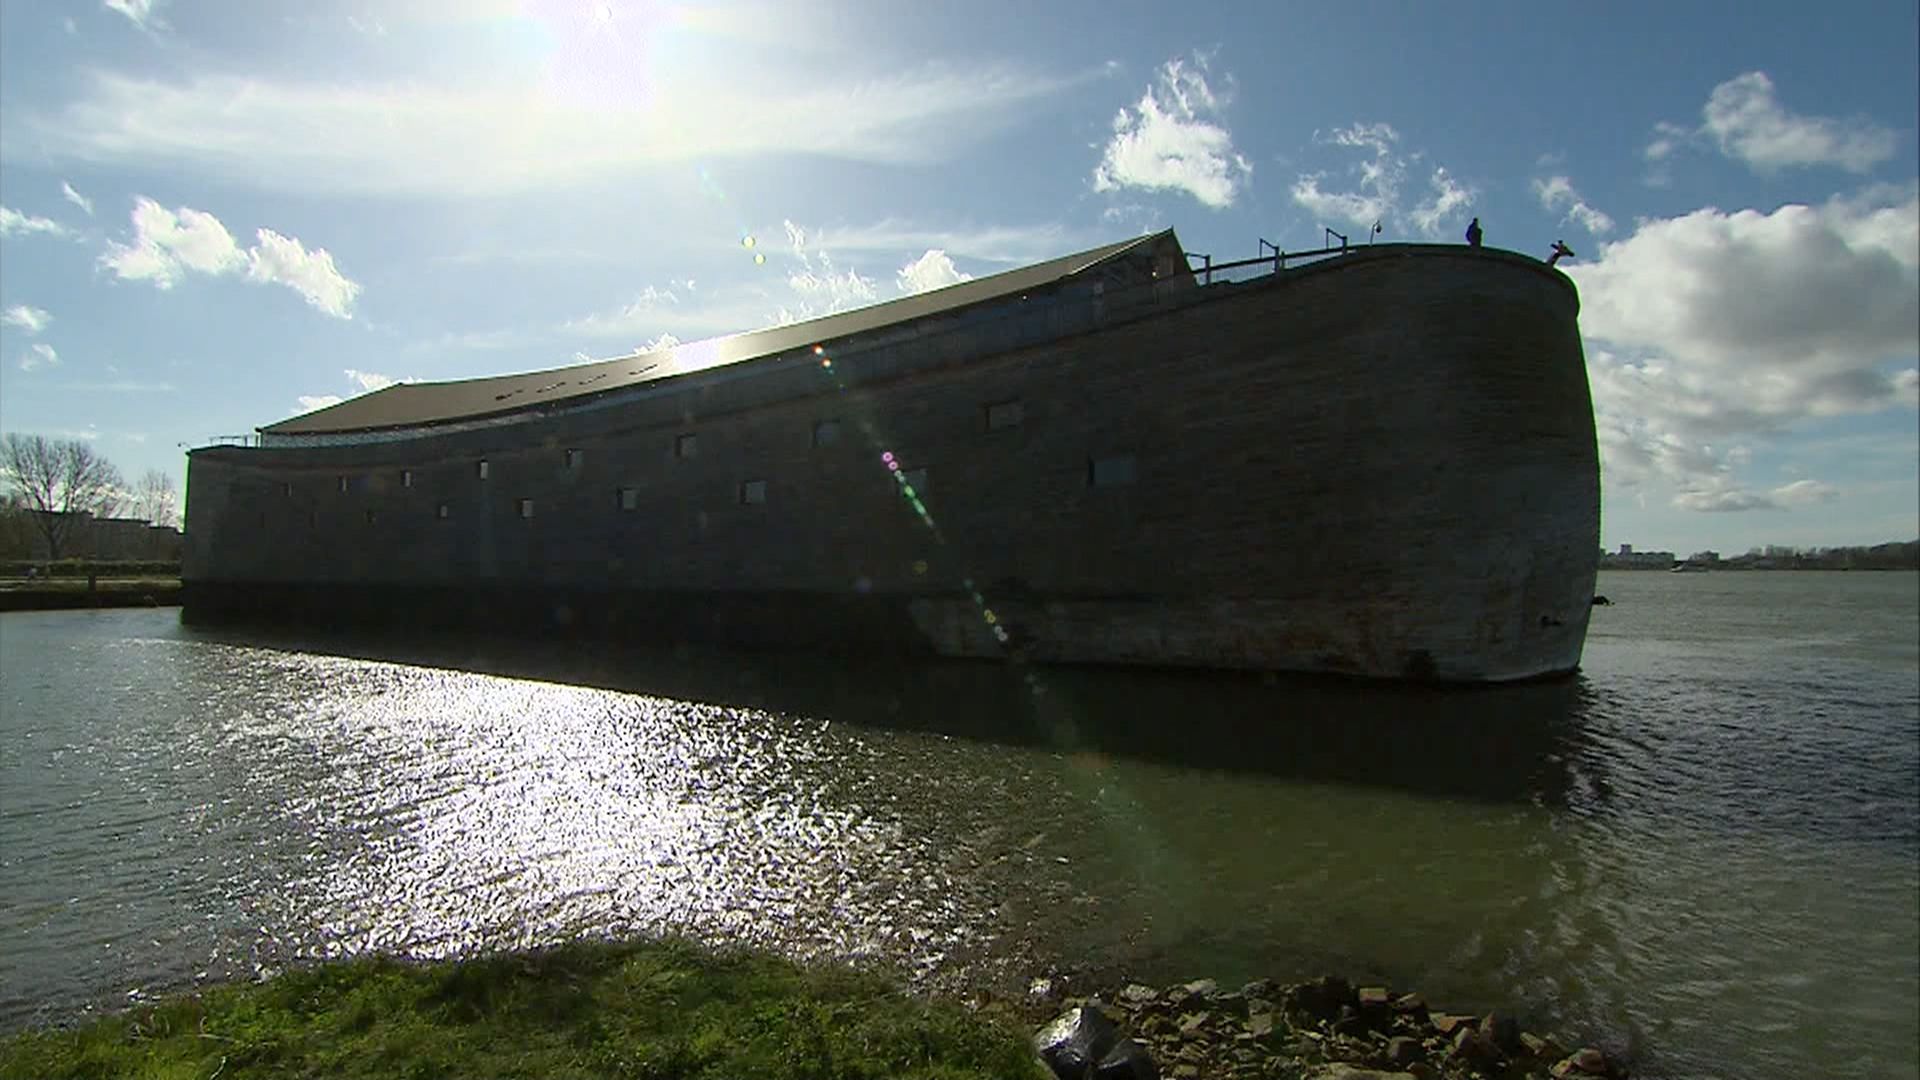 Life Size Noah's Ark Replica Draws Tourists In Netherlands